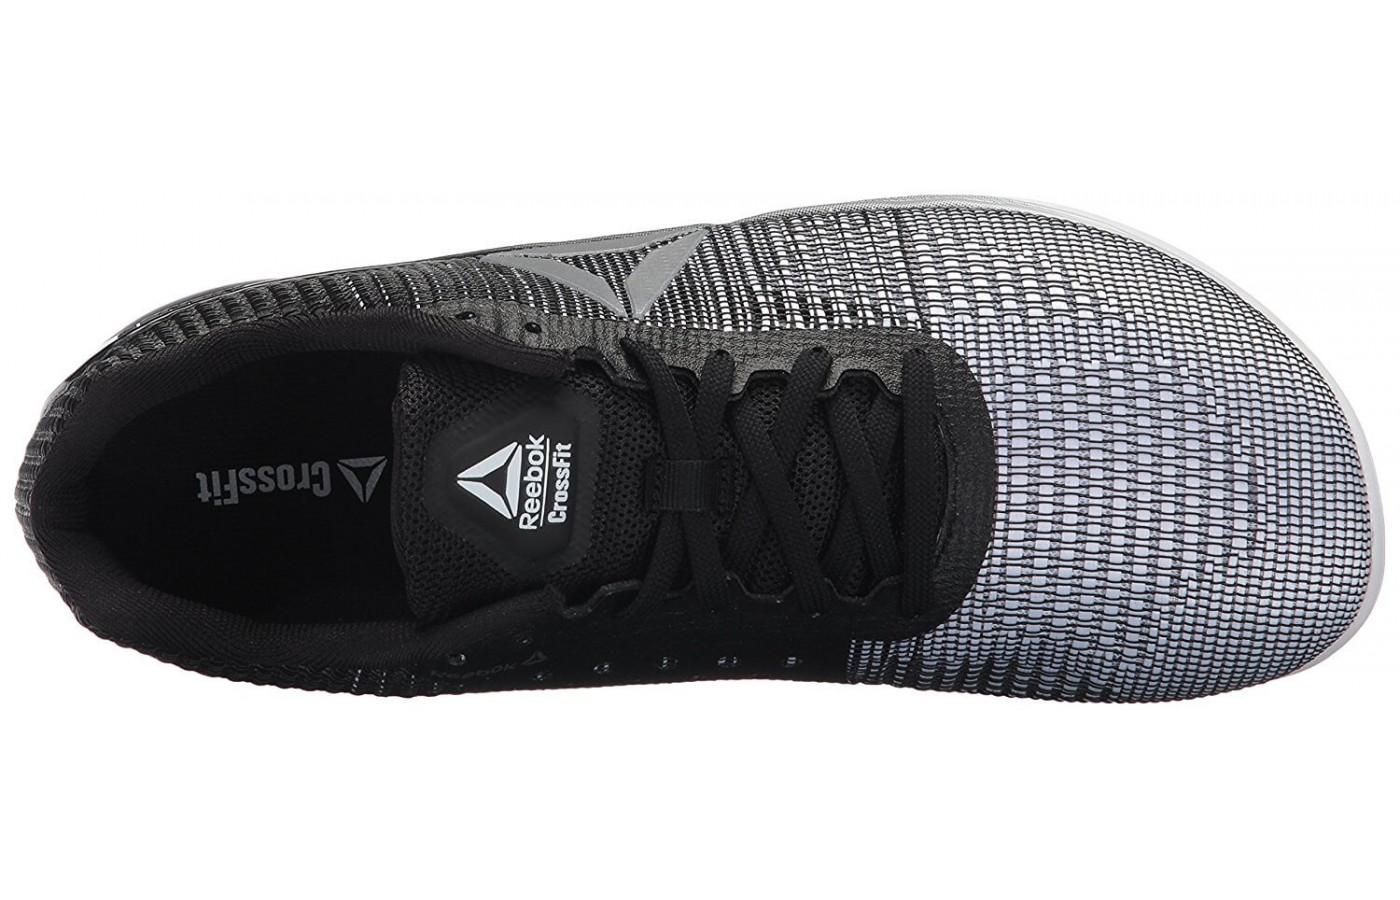 The Reebok Crossfit Nano 7 Weave's upper is made from similar material to Nike's Flyknit footwear.